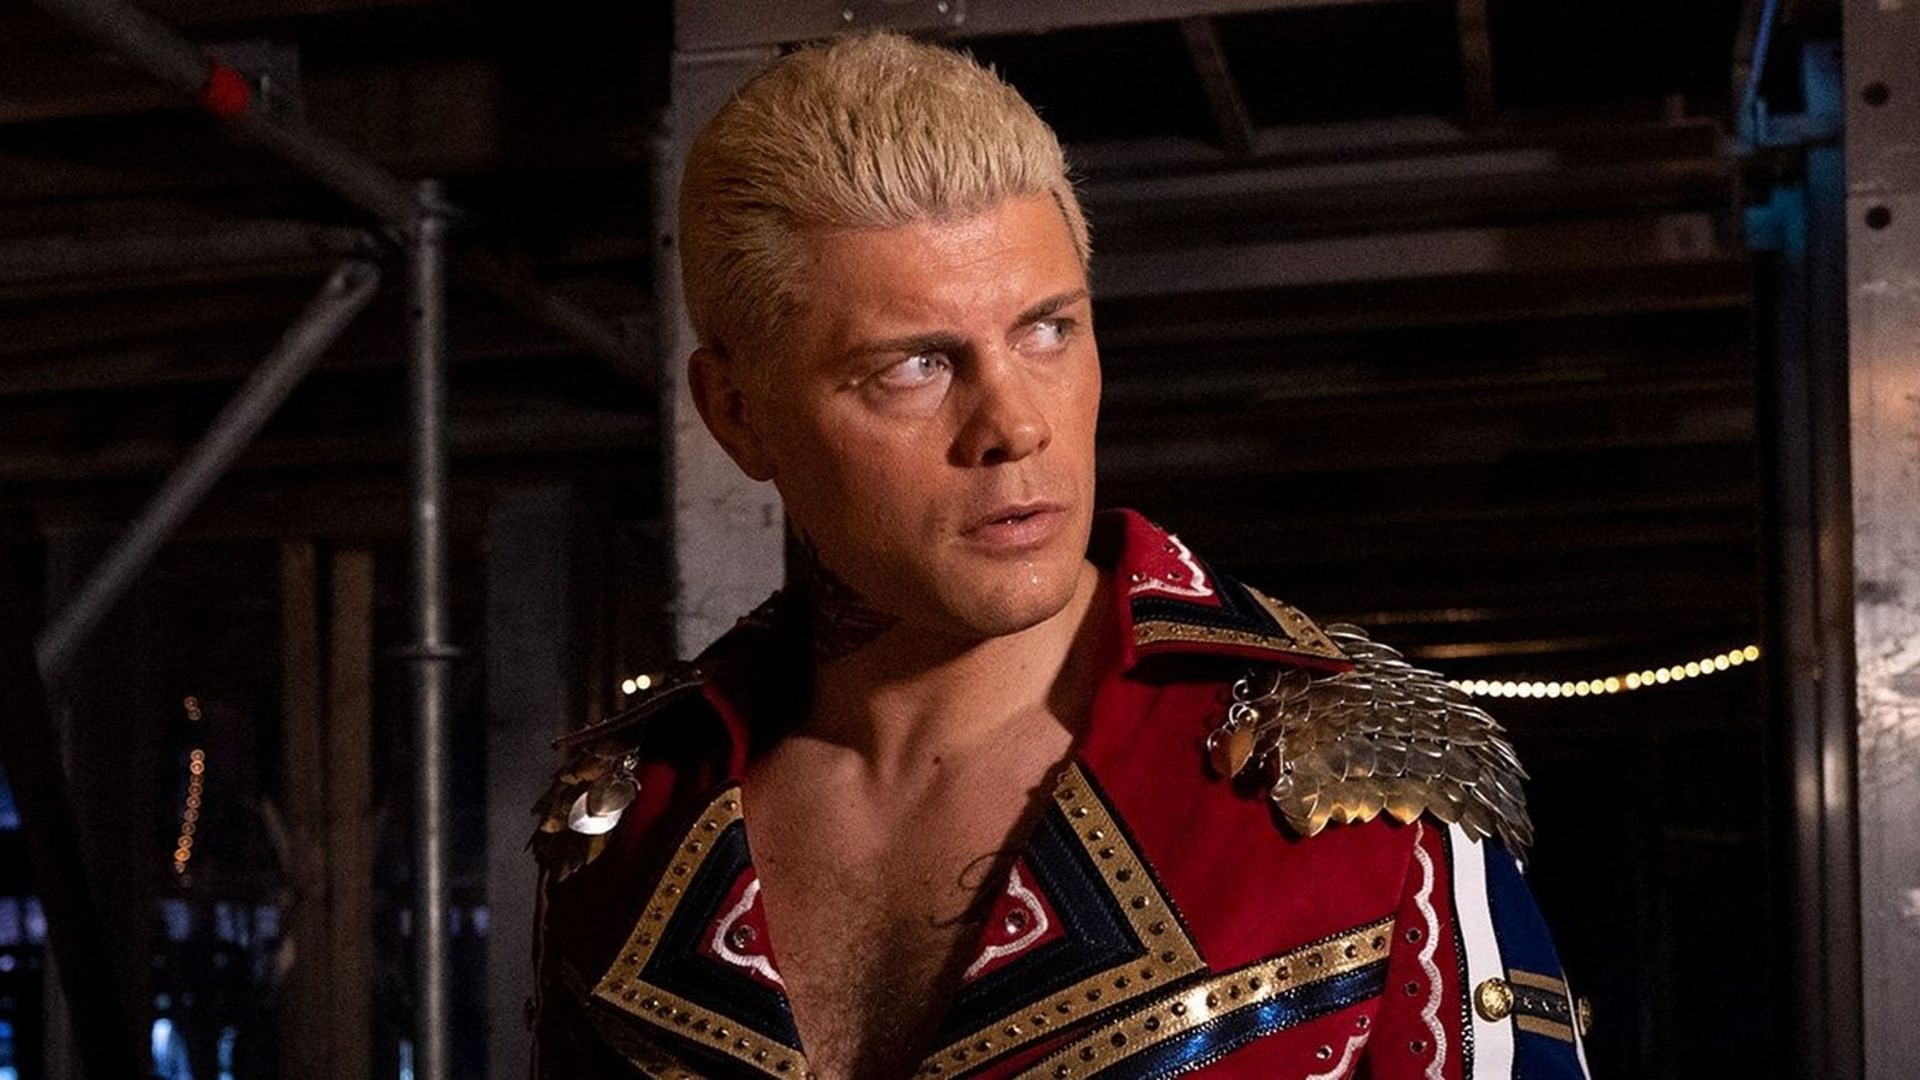 Who will Cody Rhodes face at WWE SuperShow on August 19th?